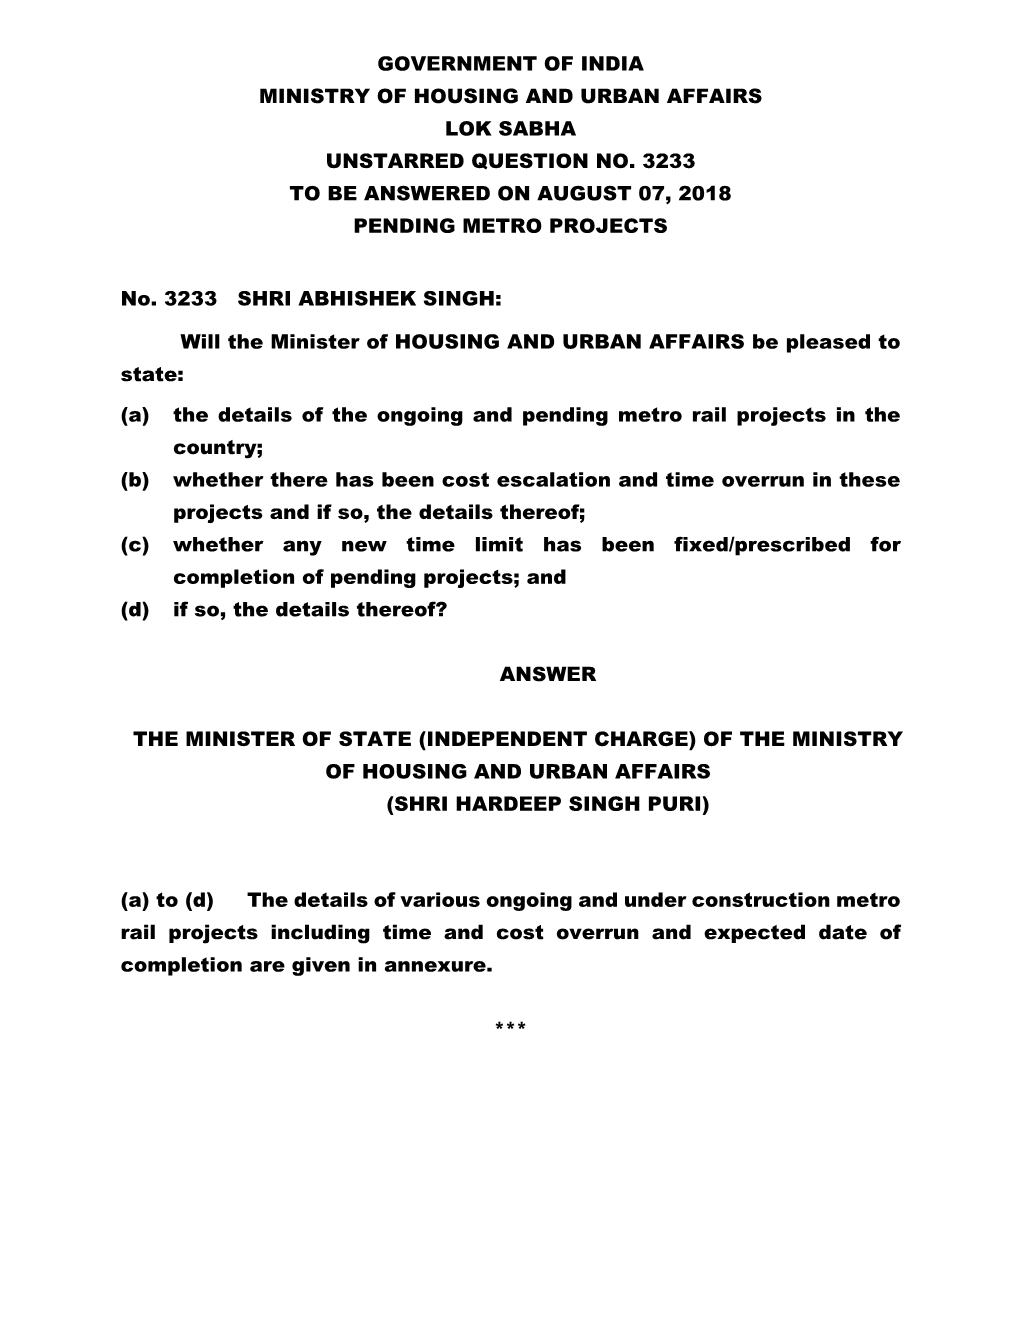 Government of India Ministry of Housing and Urban Affairs Lok Sabha Unstarred Question No